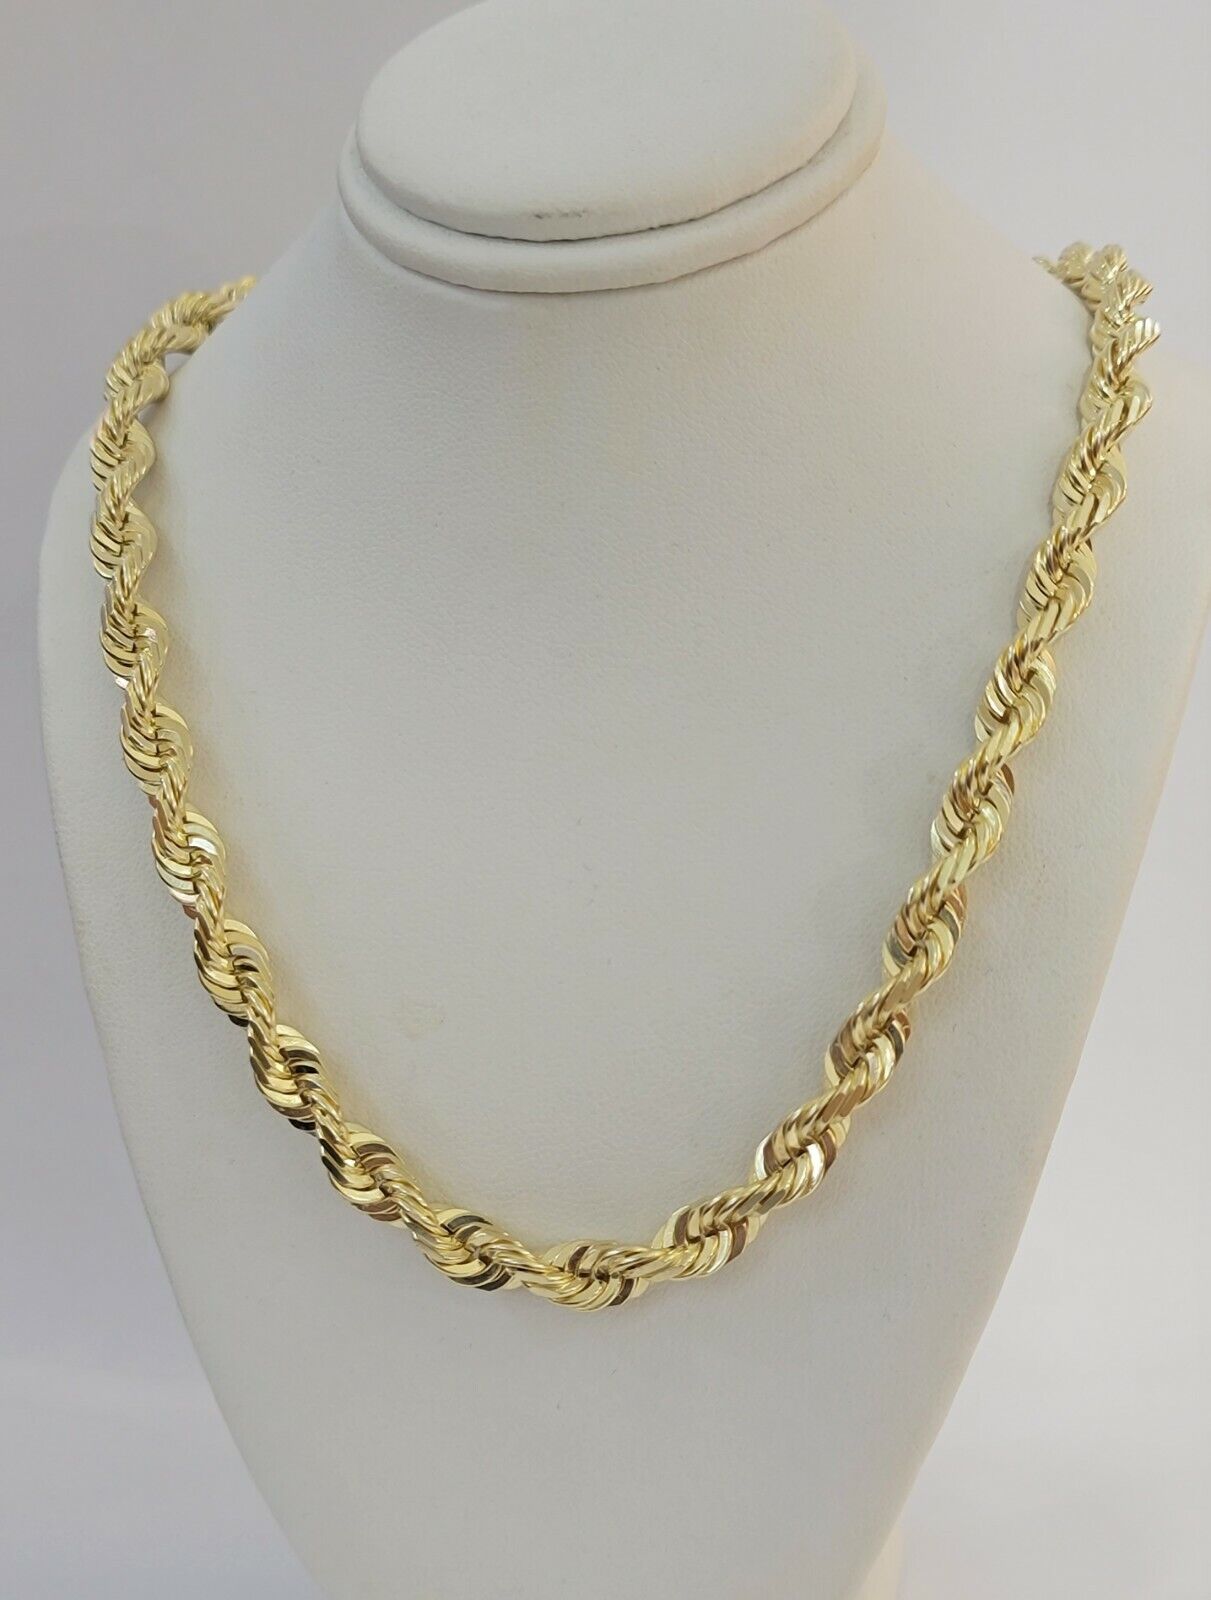 REAL 10k Gold Rope Chain 4mm 22 Inch Necklace Yellow Gold Diamond Cut Men  Women | eBay